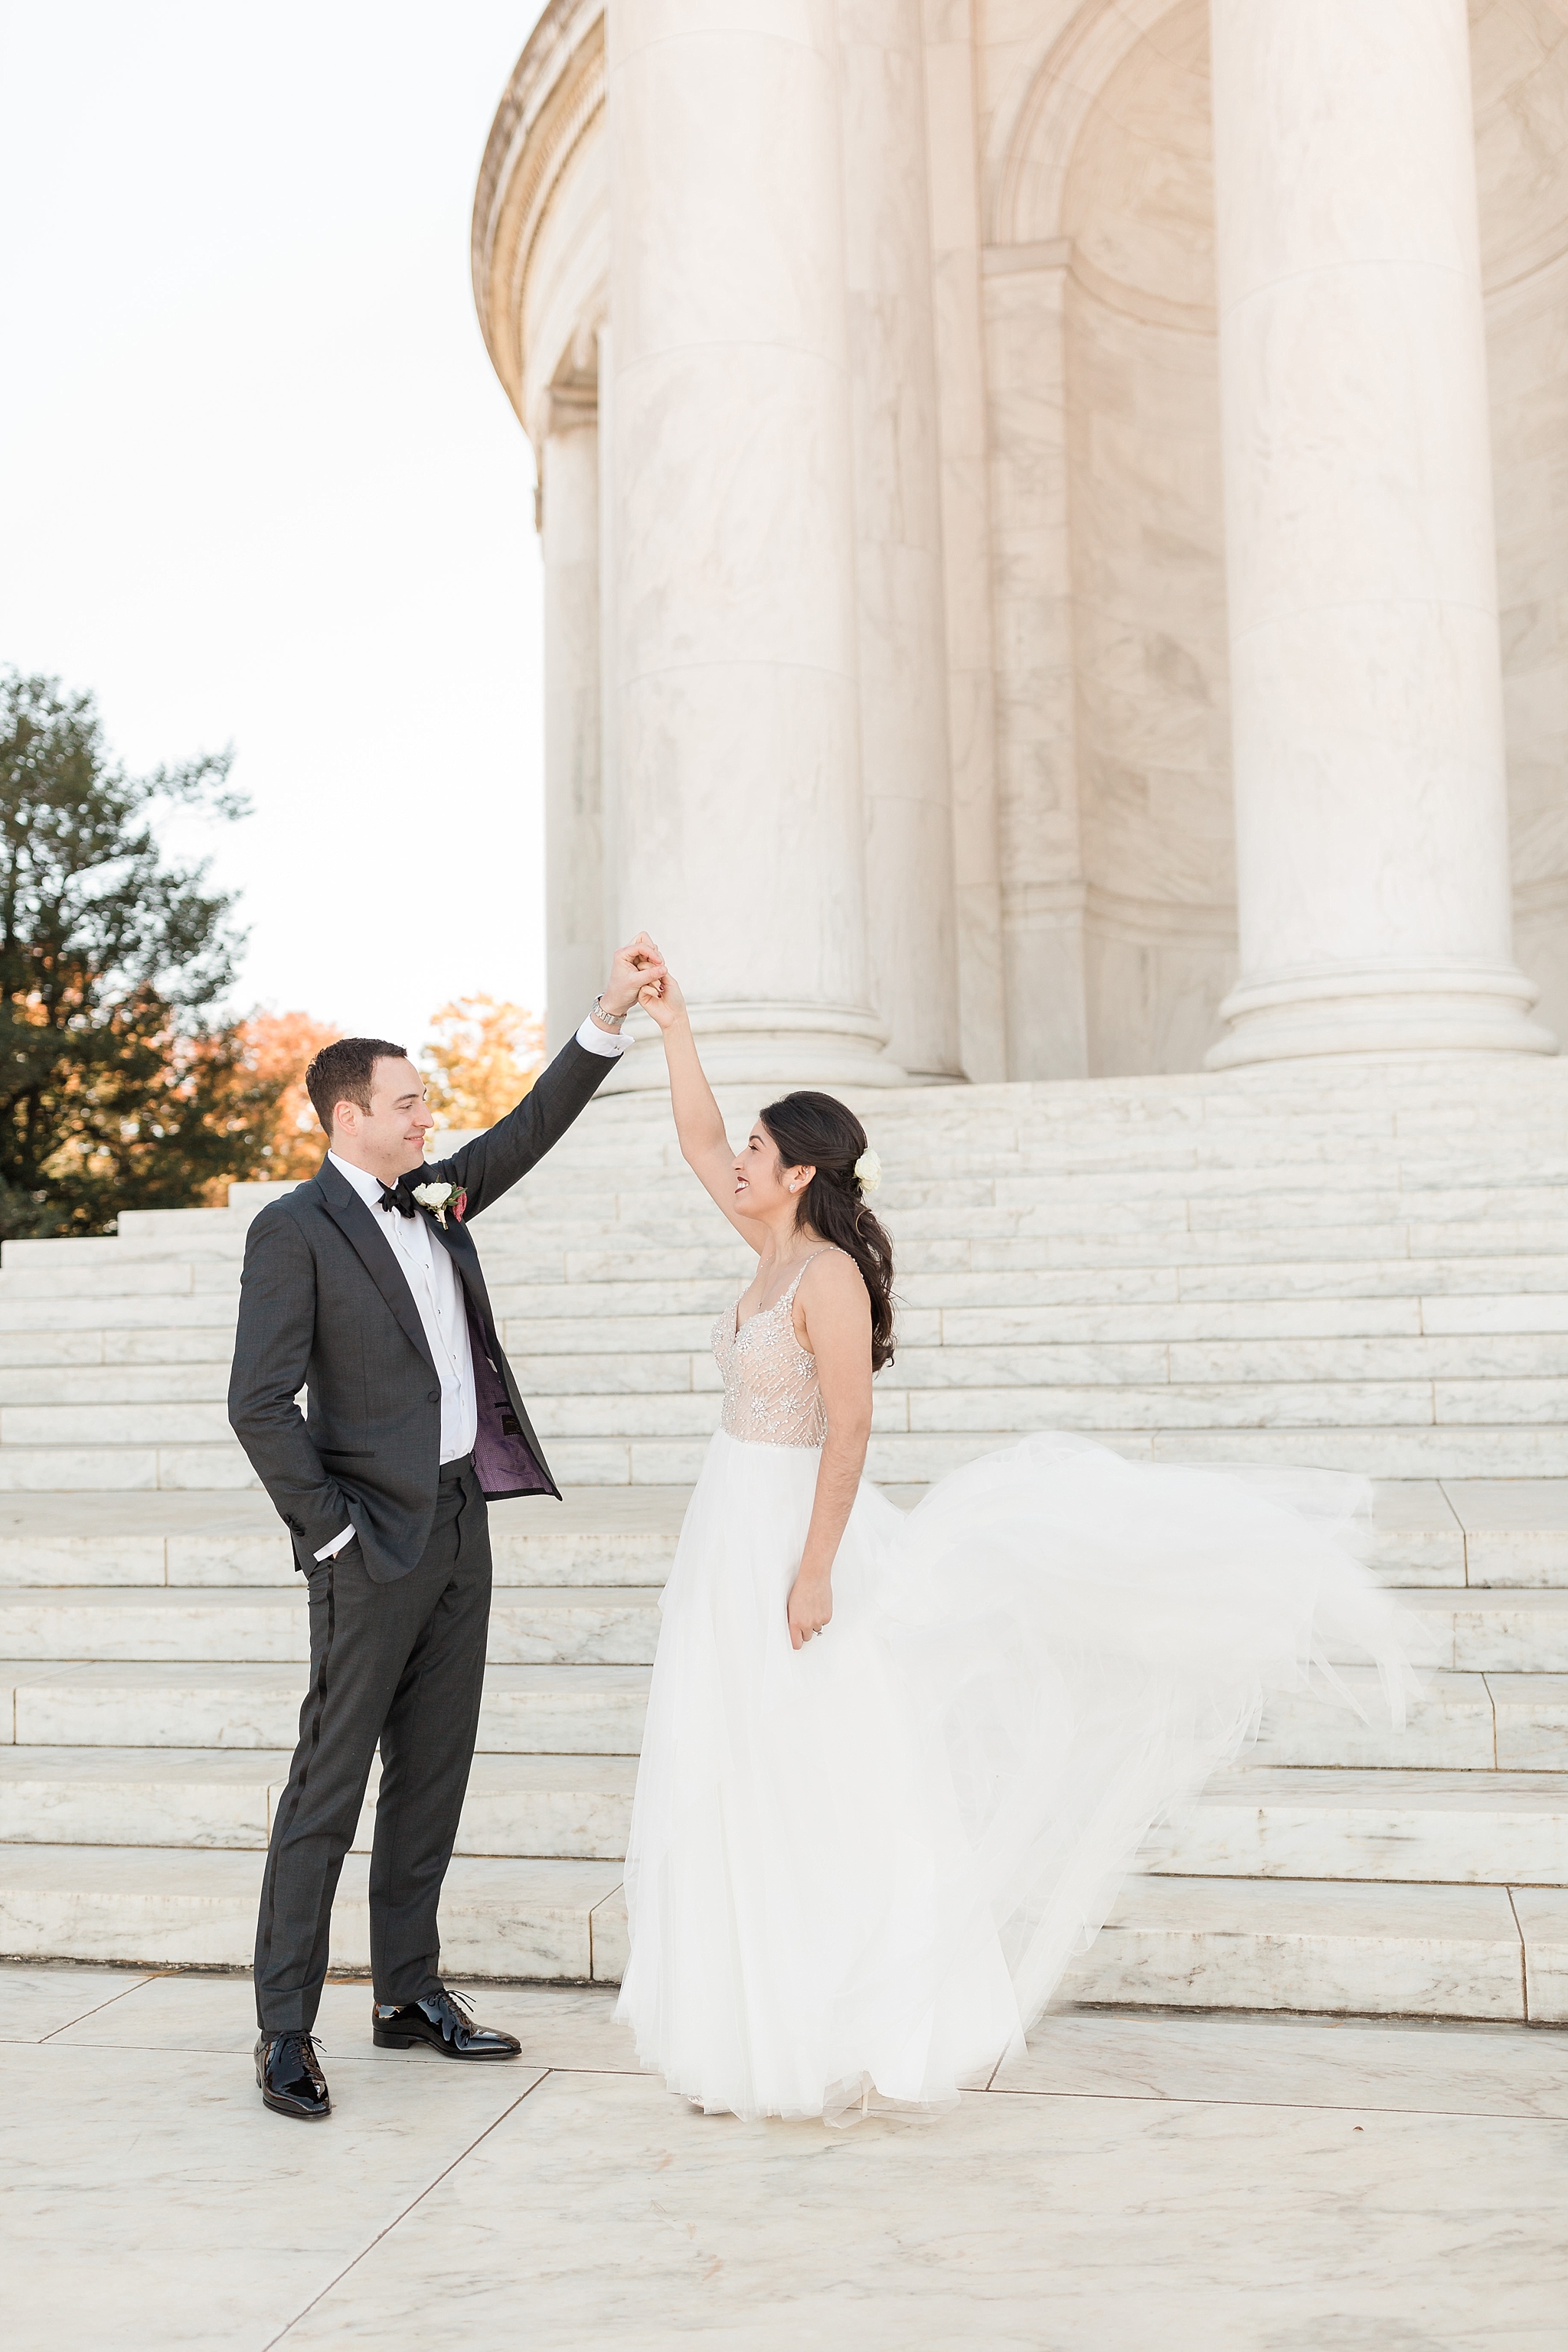 A stunning fall wedding at District Winery in Washington, DC.